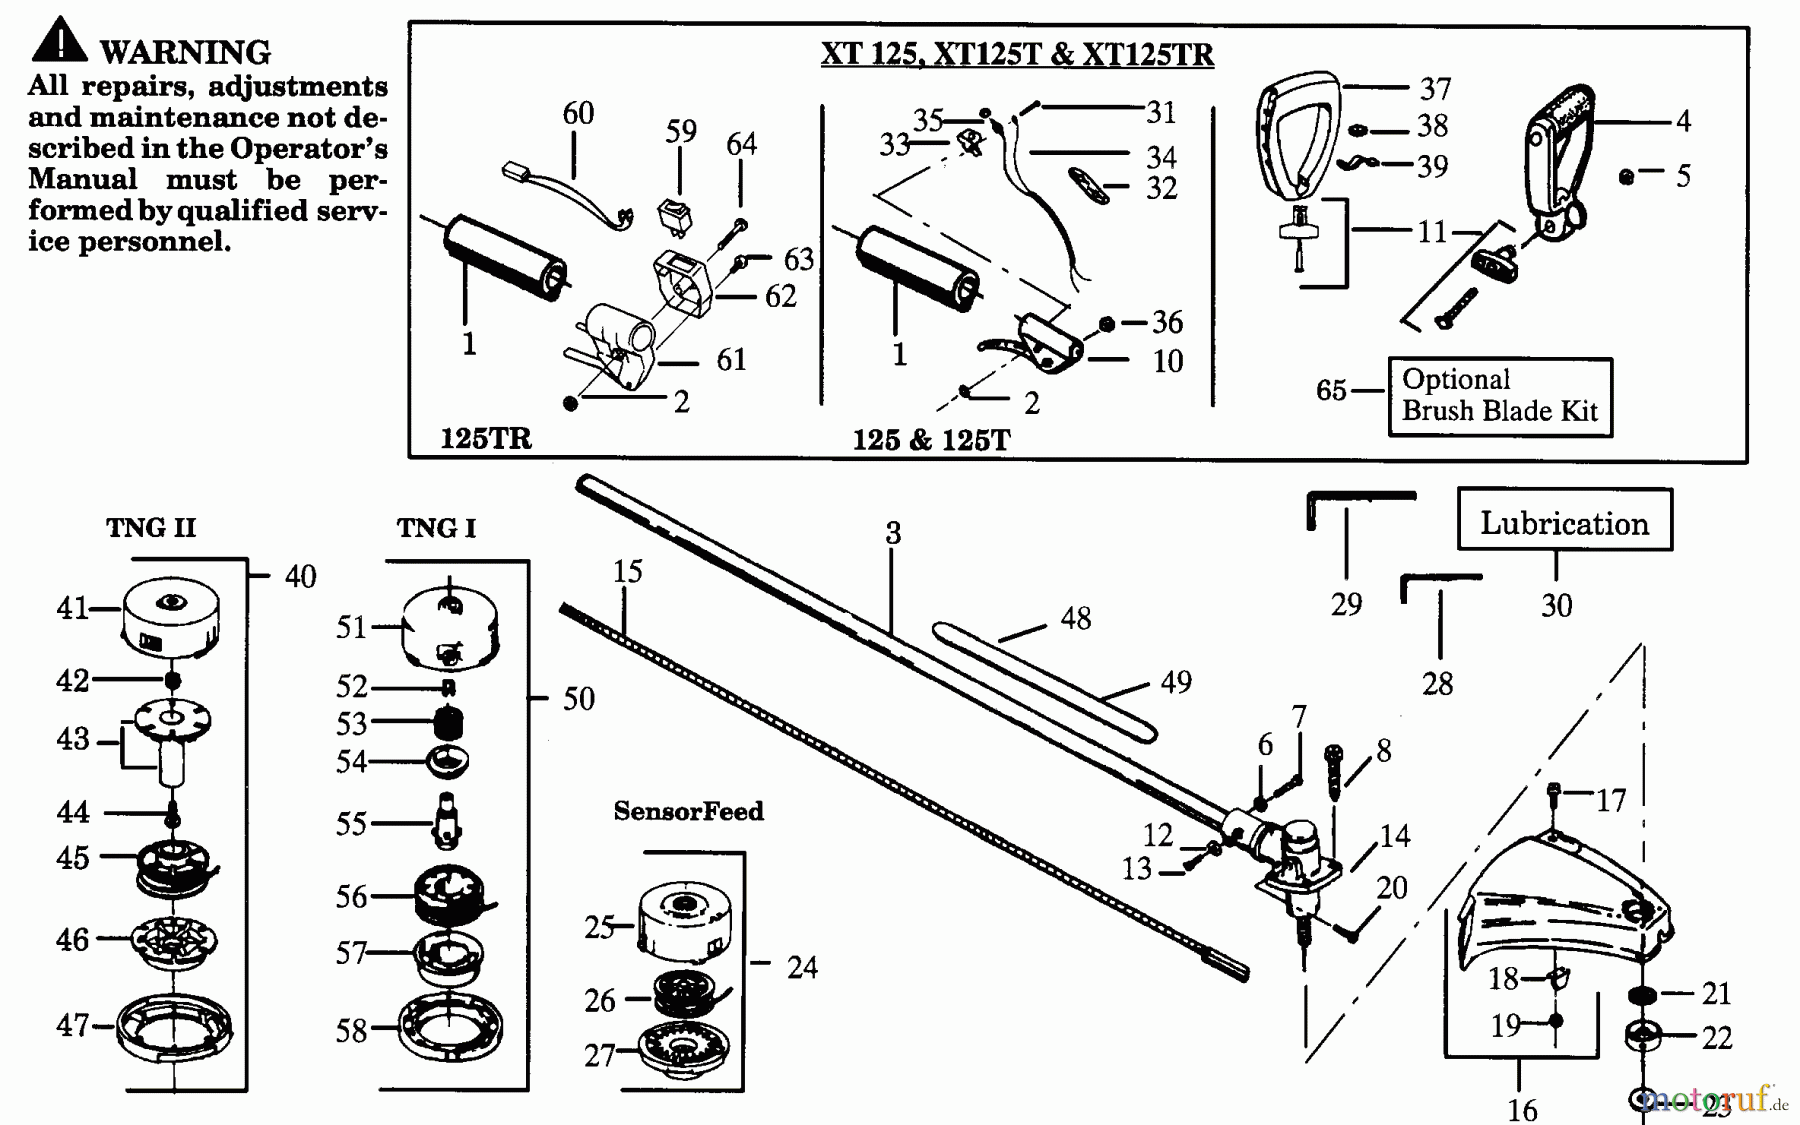  Poulan / Weed Eater Motorsensen, Trimmer XT125TR - Weed Eater String Trimmer CUTTING HEAD & DRIVE SHAFT ASSEMBLY